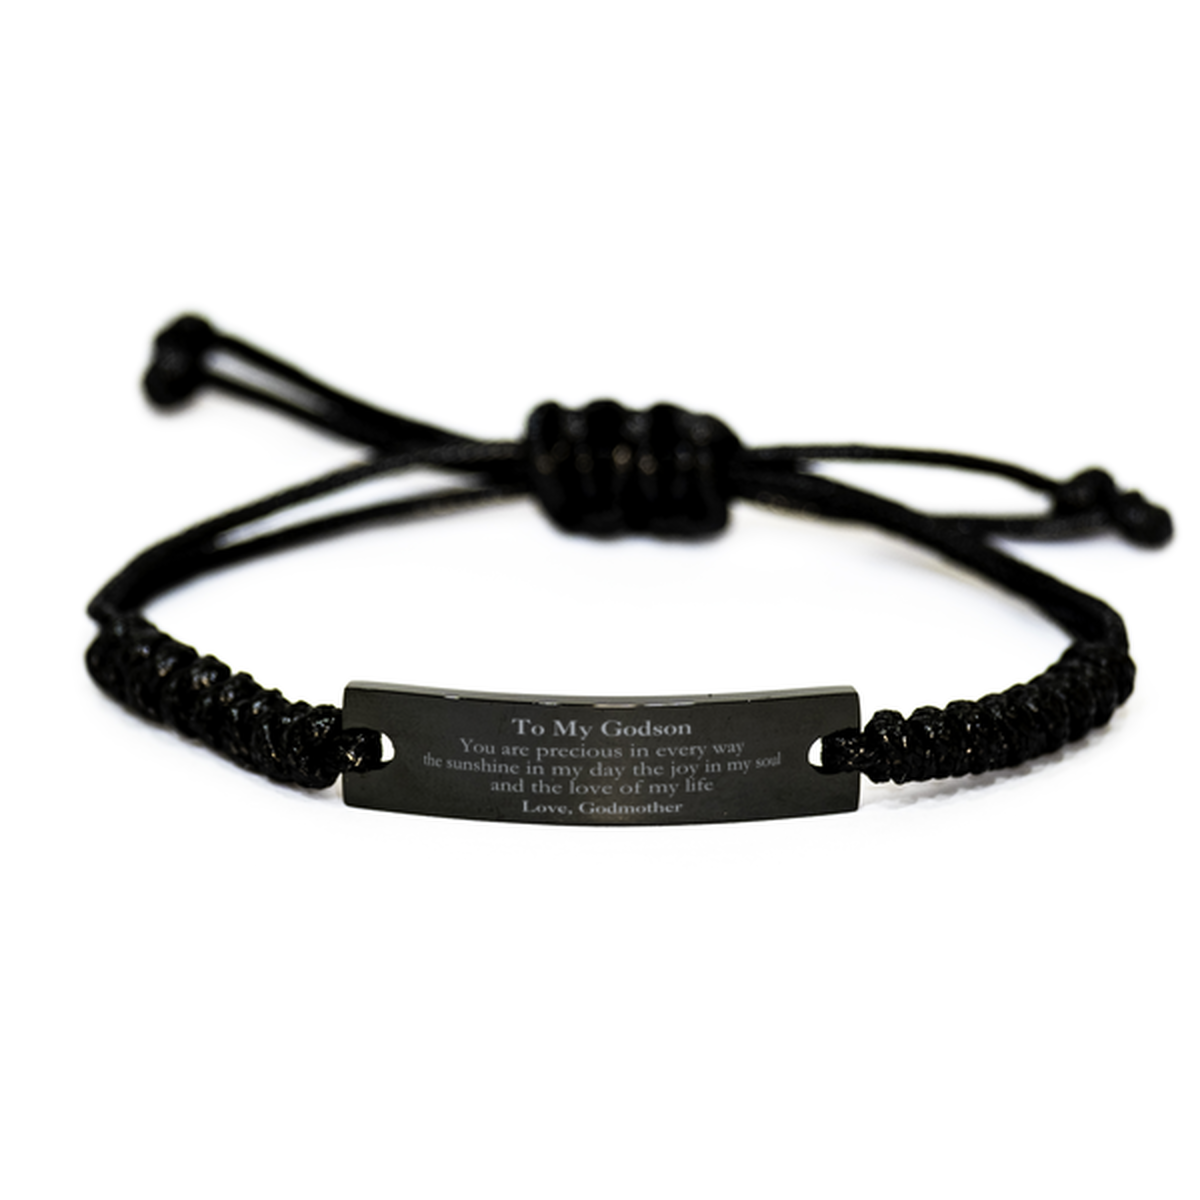 Graduation Gifts for Godson Black Rope Bracelet Present from Godmother, Christmas Godson Birthday Gifts Godson You are precious in every way the sunshine in my day. Love, Godmother